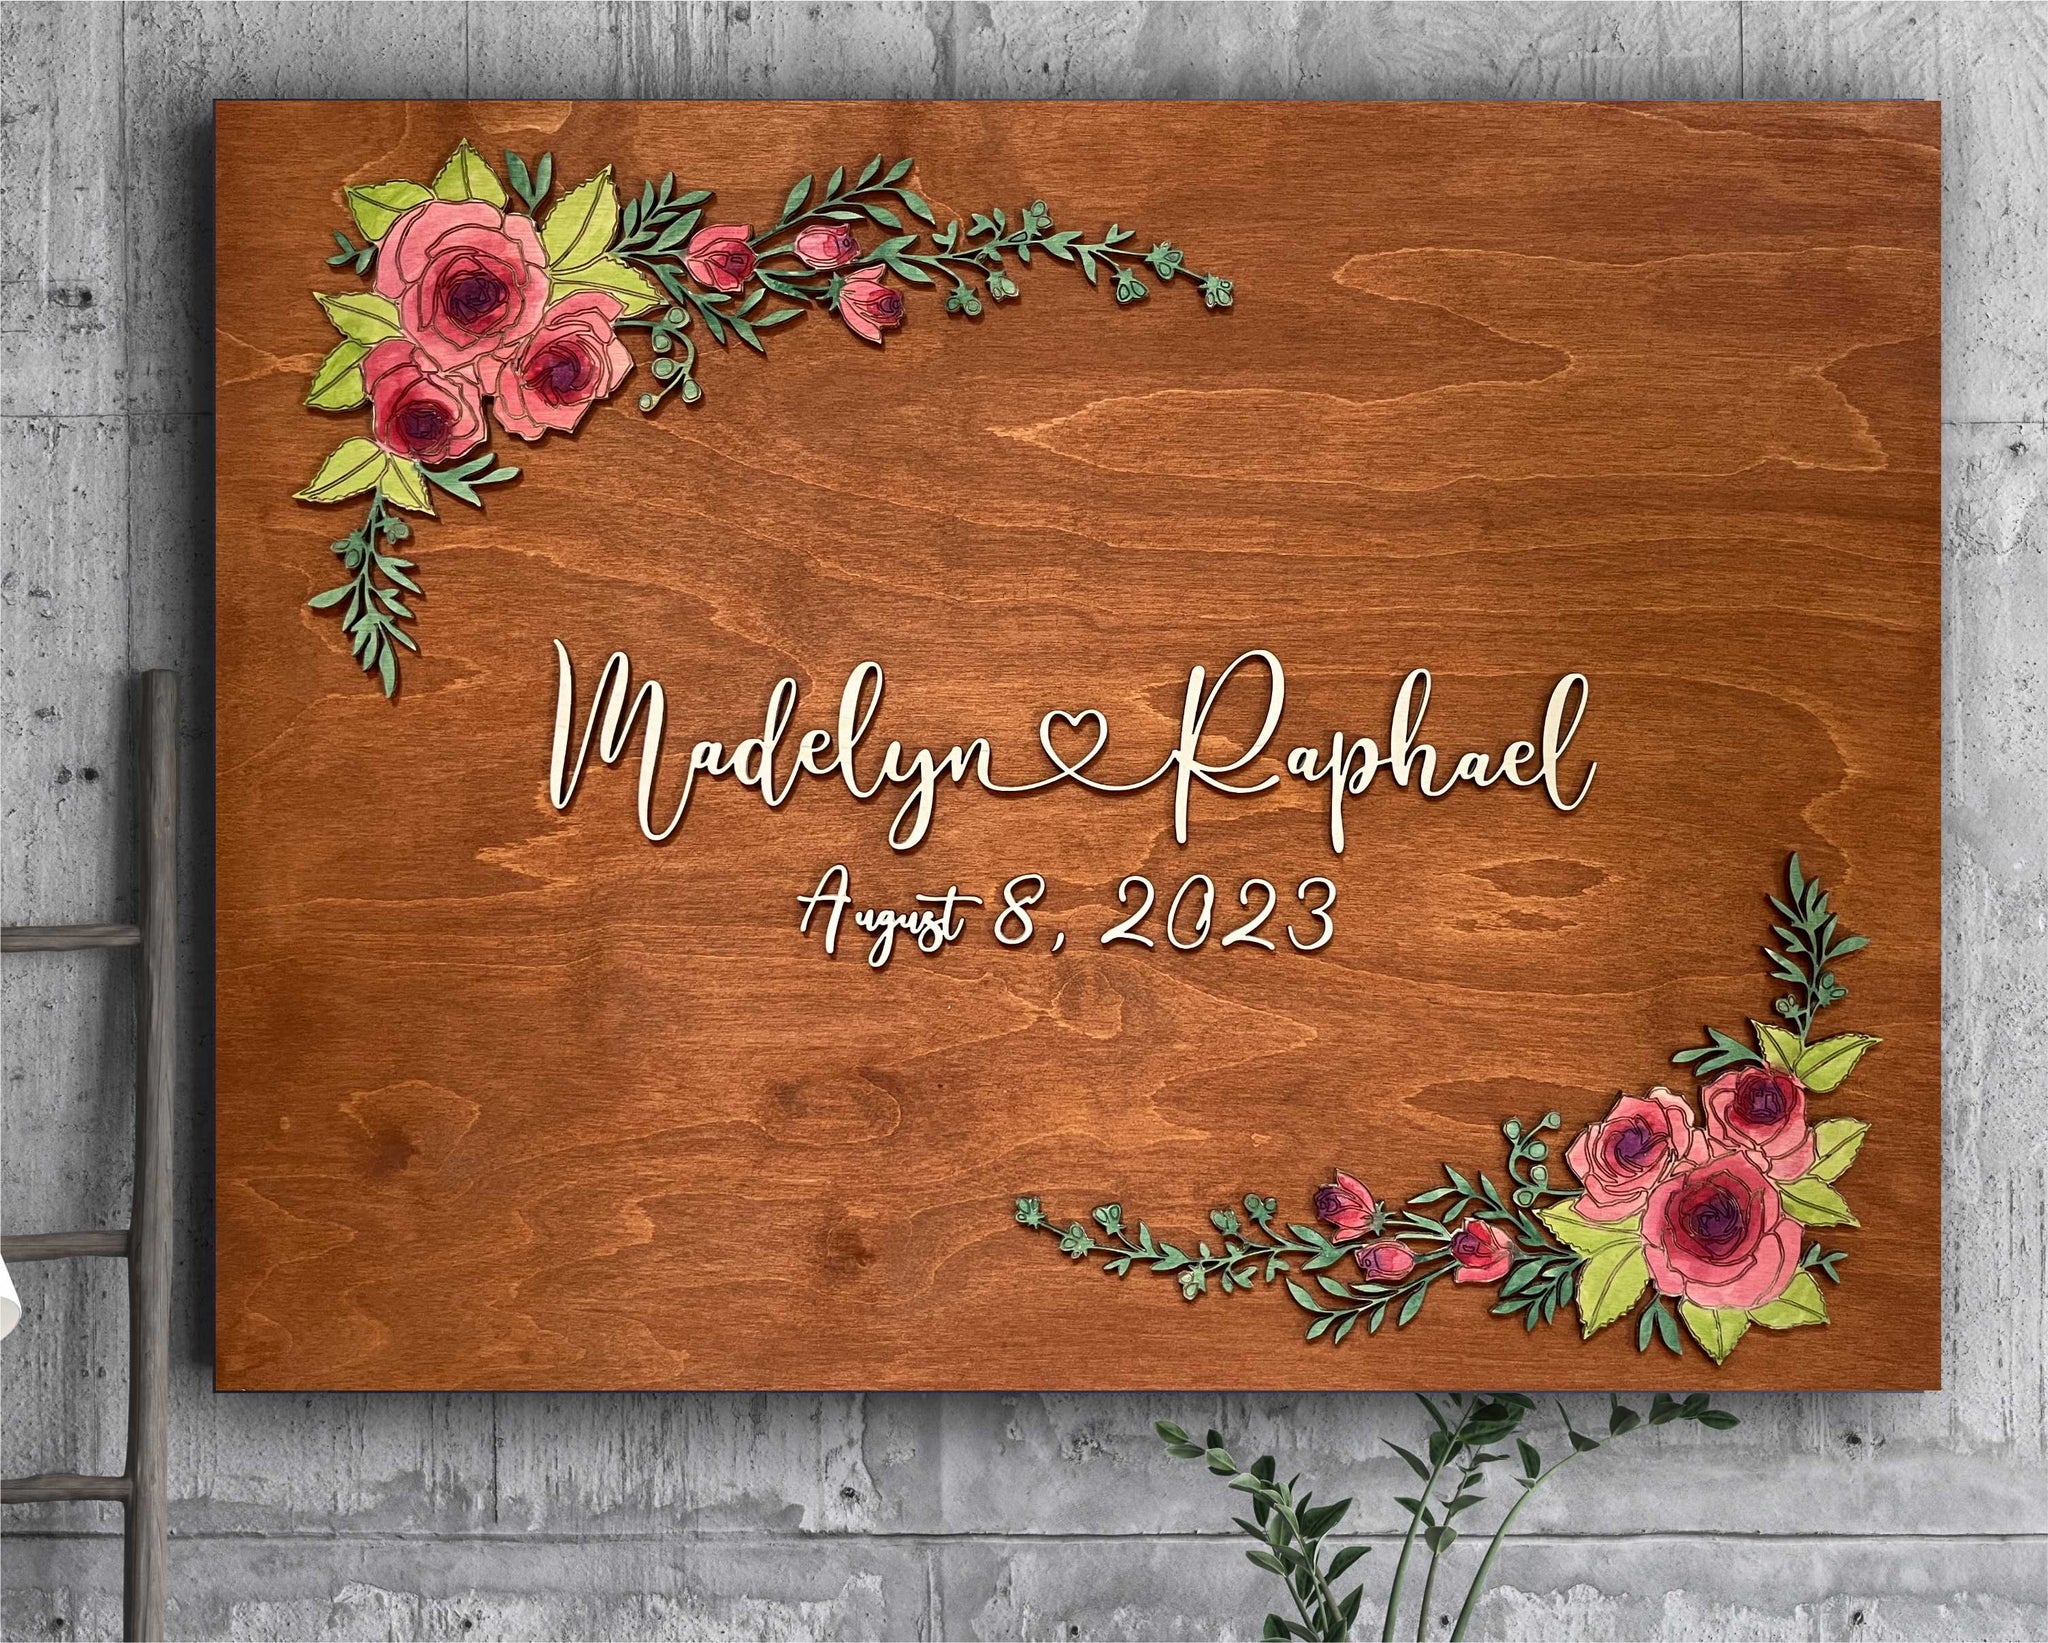 Wood hand painted last name sign with floral motifs, wedding guest book or welcome sign, family Christmas gift, newlyweds, wooden sign gift for newly engaged